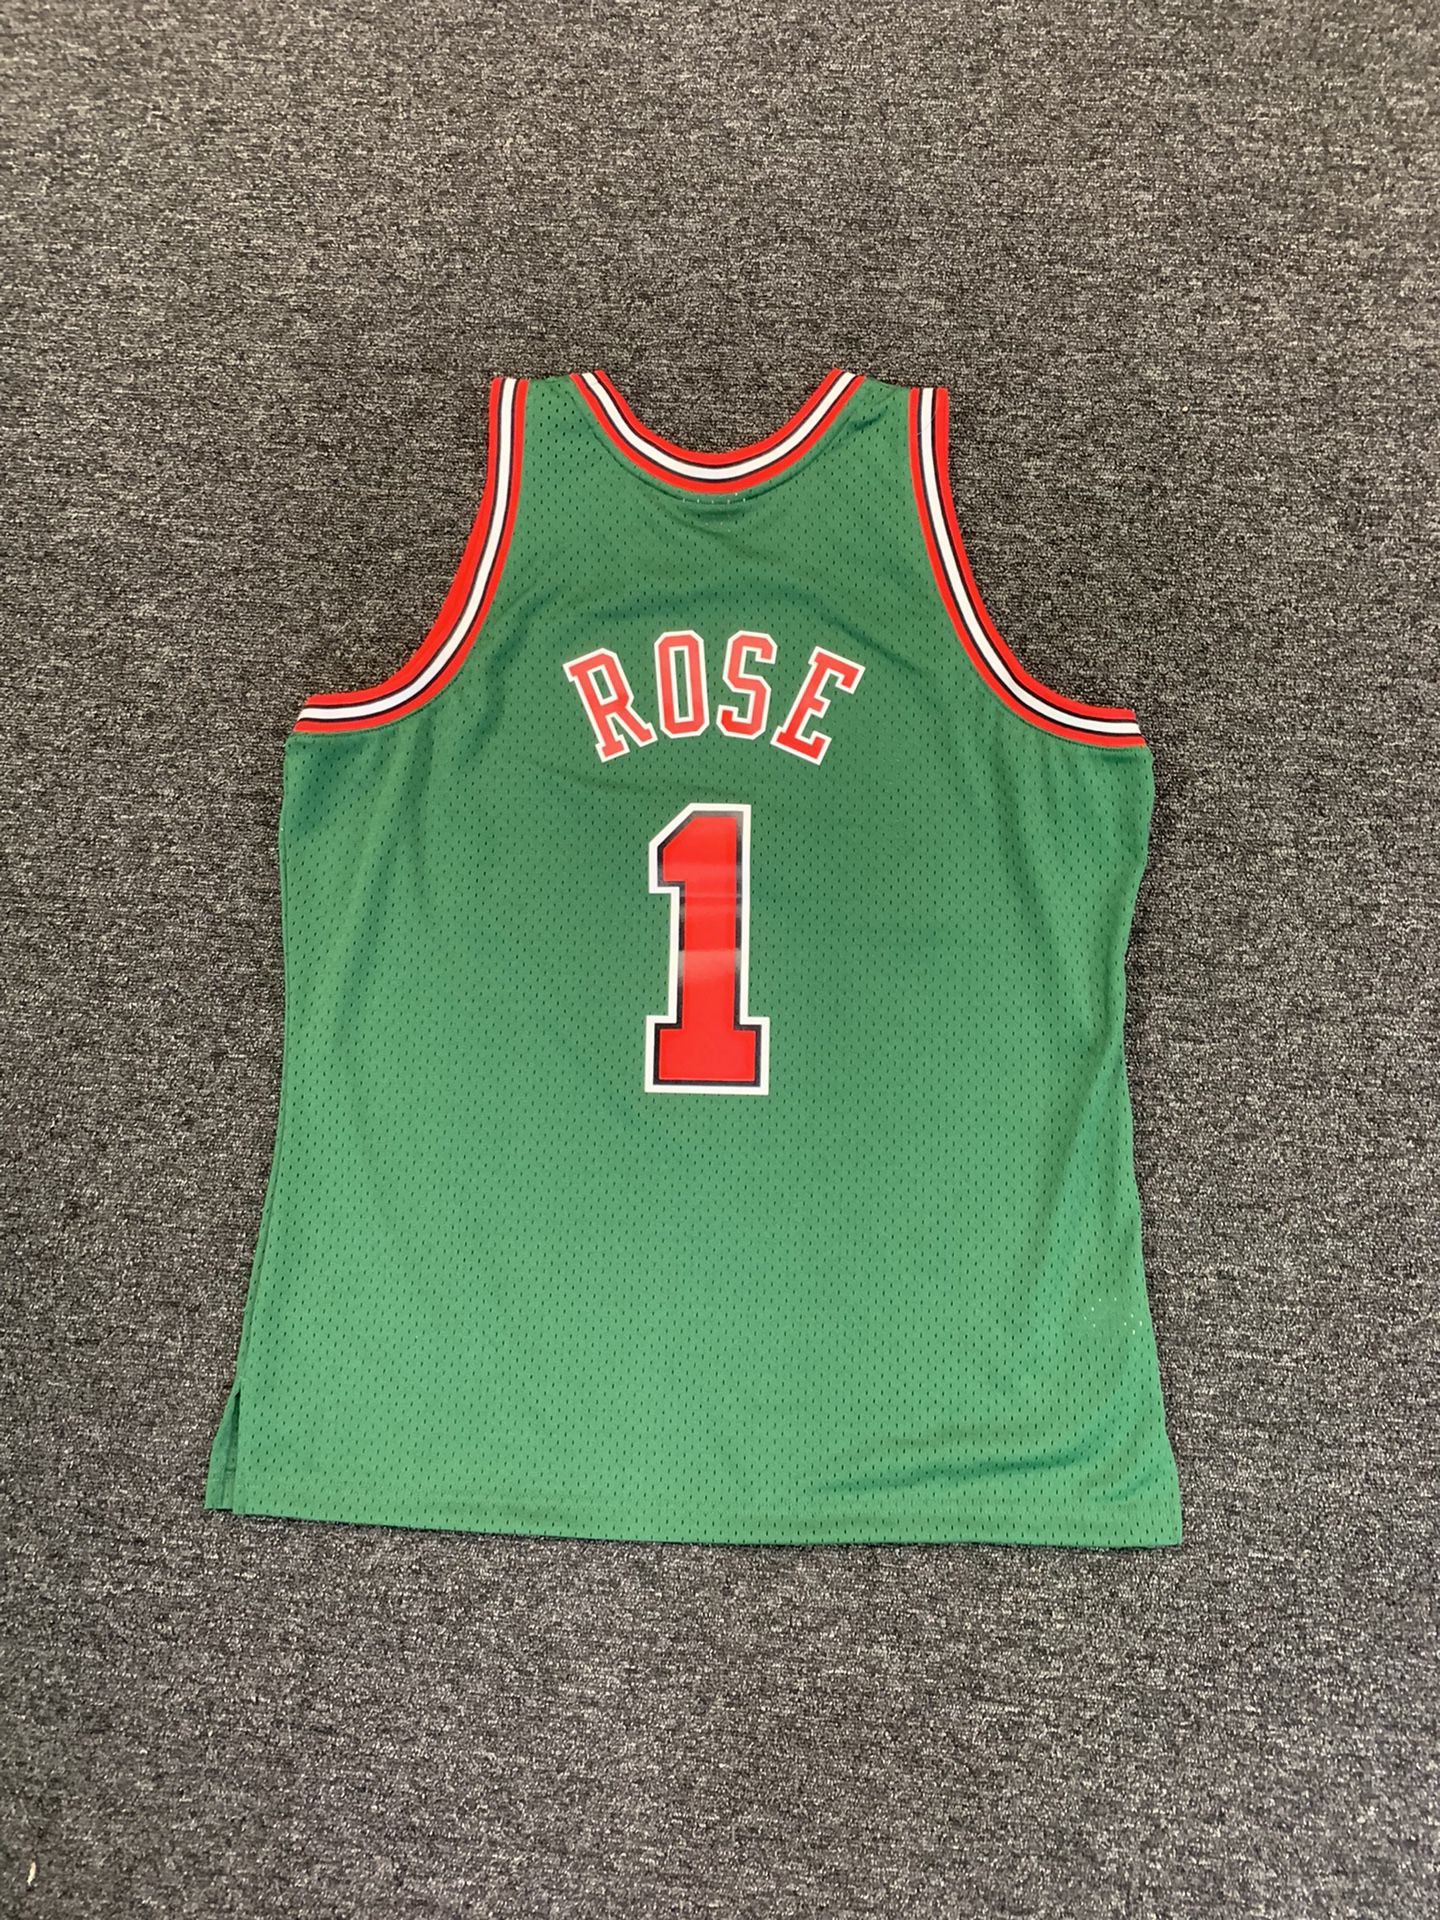 MENS DERRICK ROSE CHICAGO BULLS JERSEY HEAT PRESSED (BAGGY SHORTS INCLUDED)  for Sale in Houston, TX - OfferUp